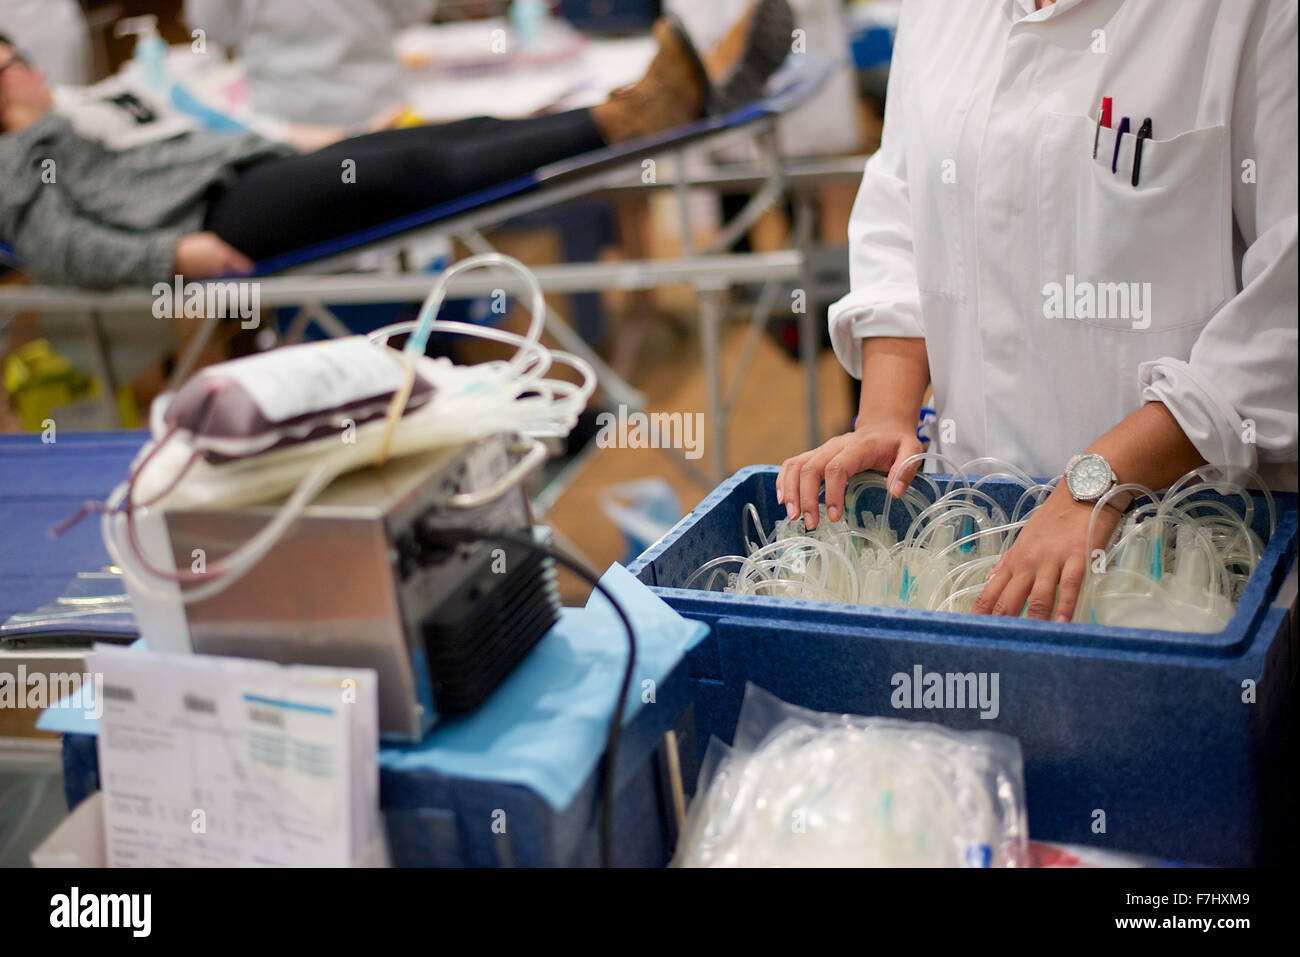 Healthcare worker sorting bags of blood, cropped Stock Photo